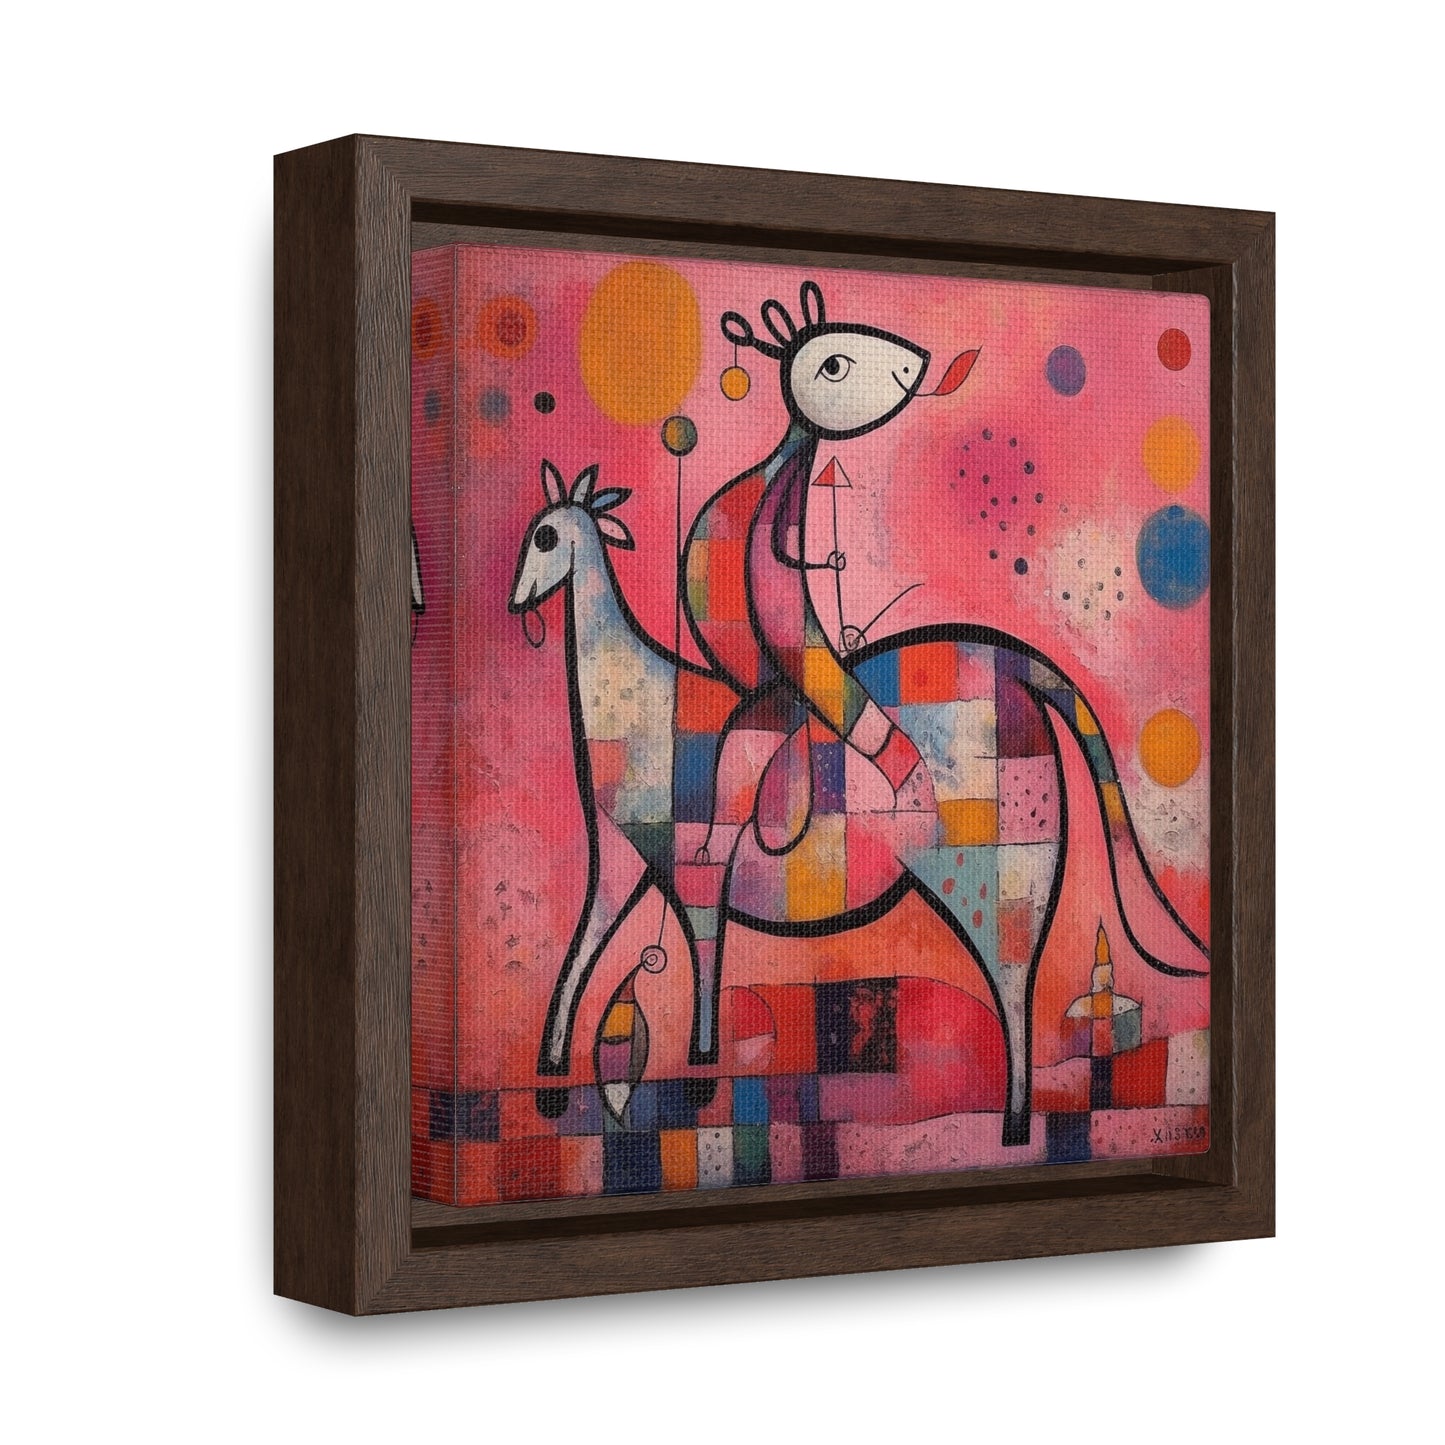 The Dreams of the Child 2, Gallery Canvas Wraps, Square Frame